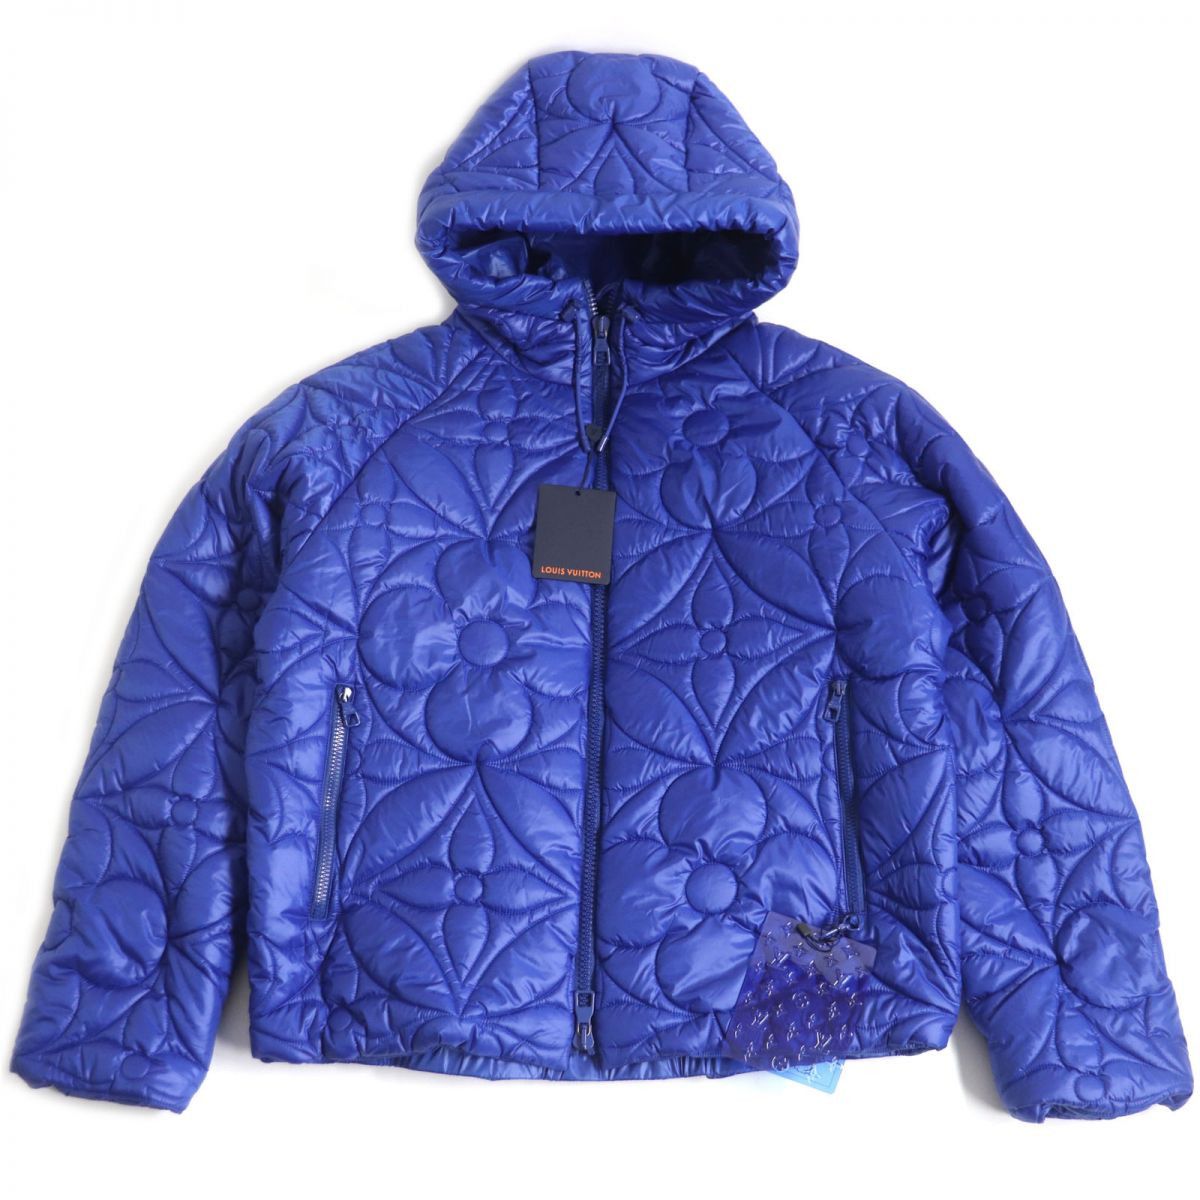 LOUIS VUITTON(ルイヴィトン) / 21AW/LVSE FLOWER QUILTED HOODIE JACKET/ダウンジャケット/52/ブラック